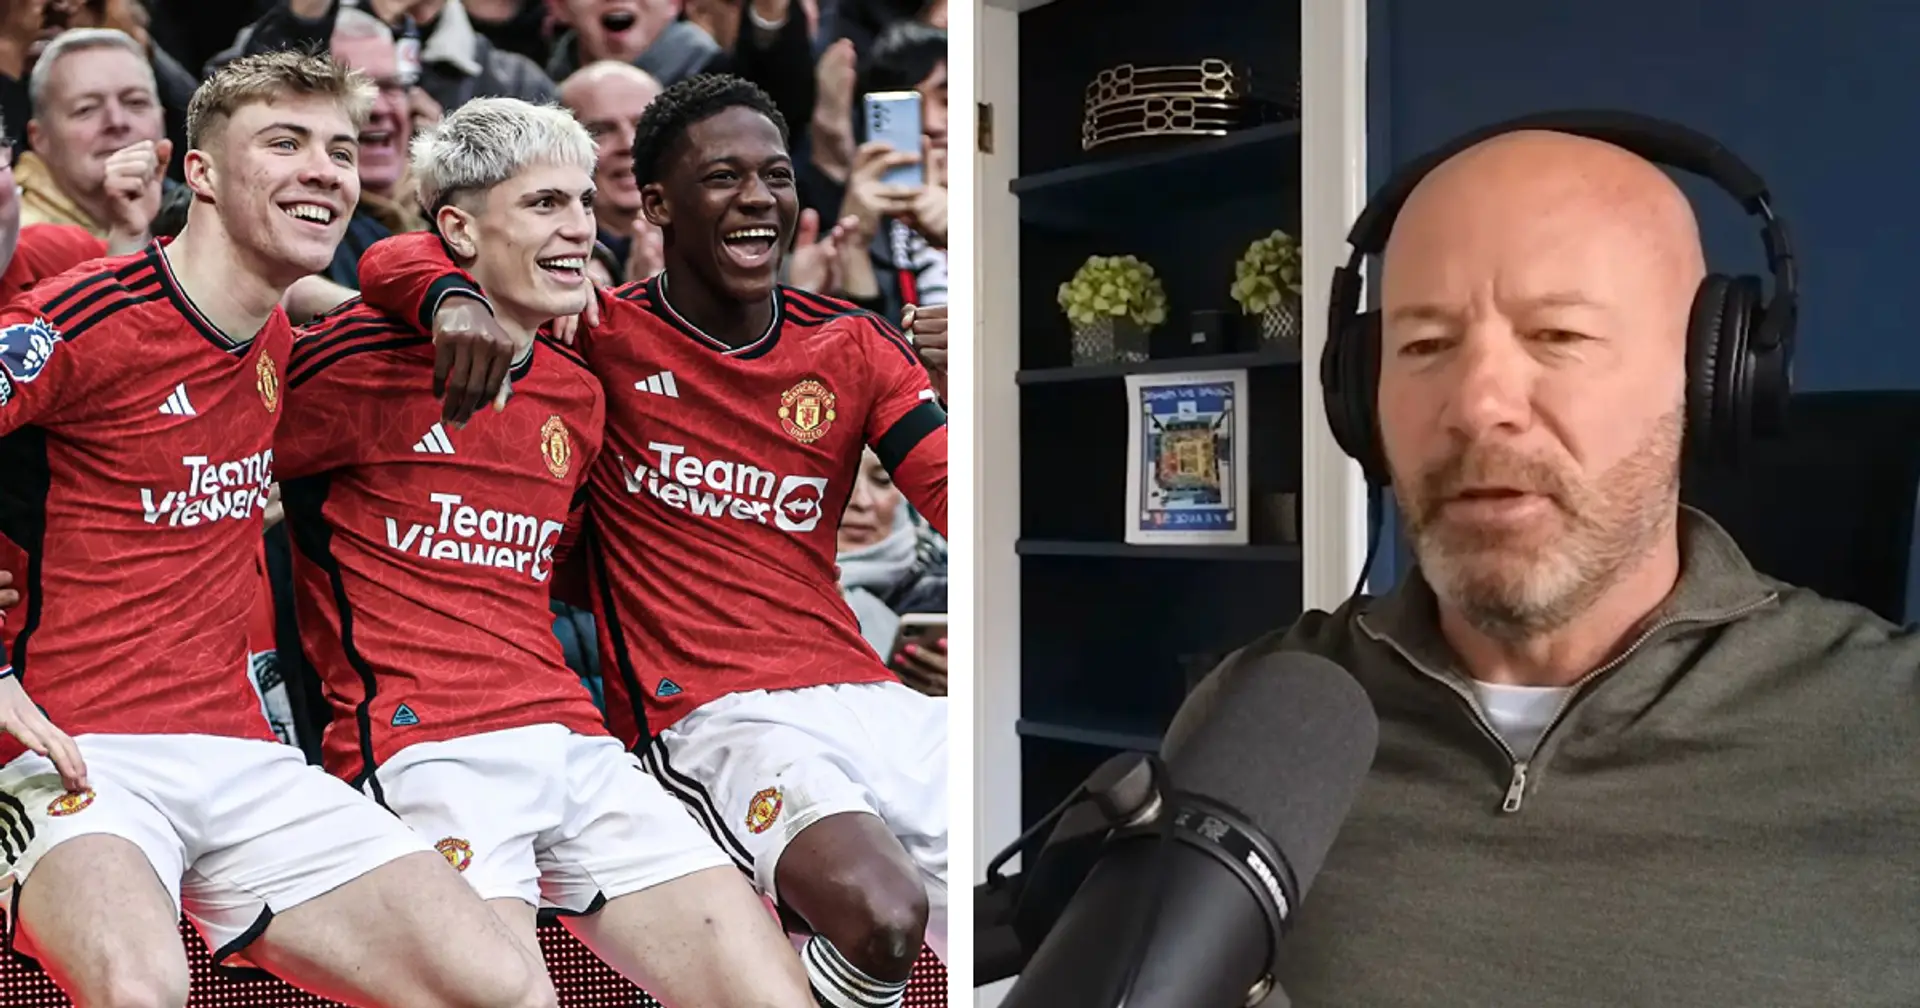 'Maybe in a month's time we will be criticising them again': Alan Shearer sends warning to Man United after West Ham win